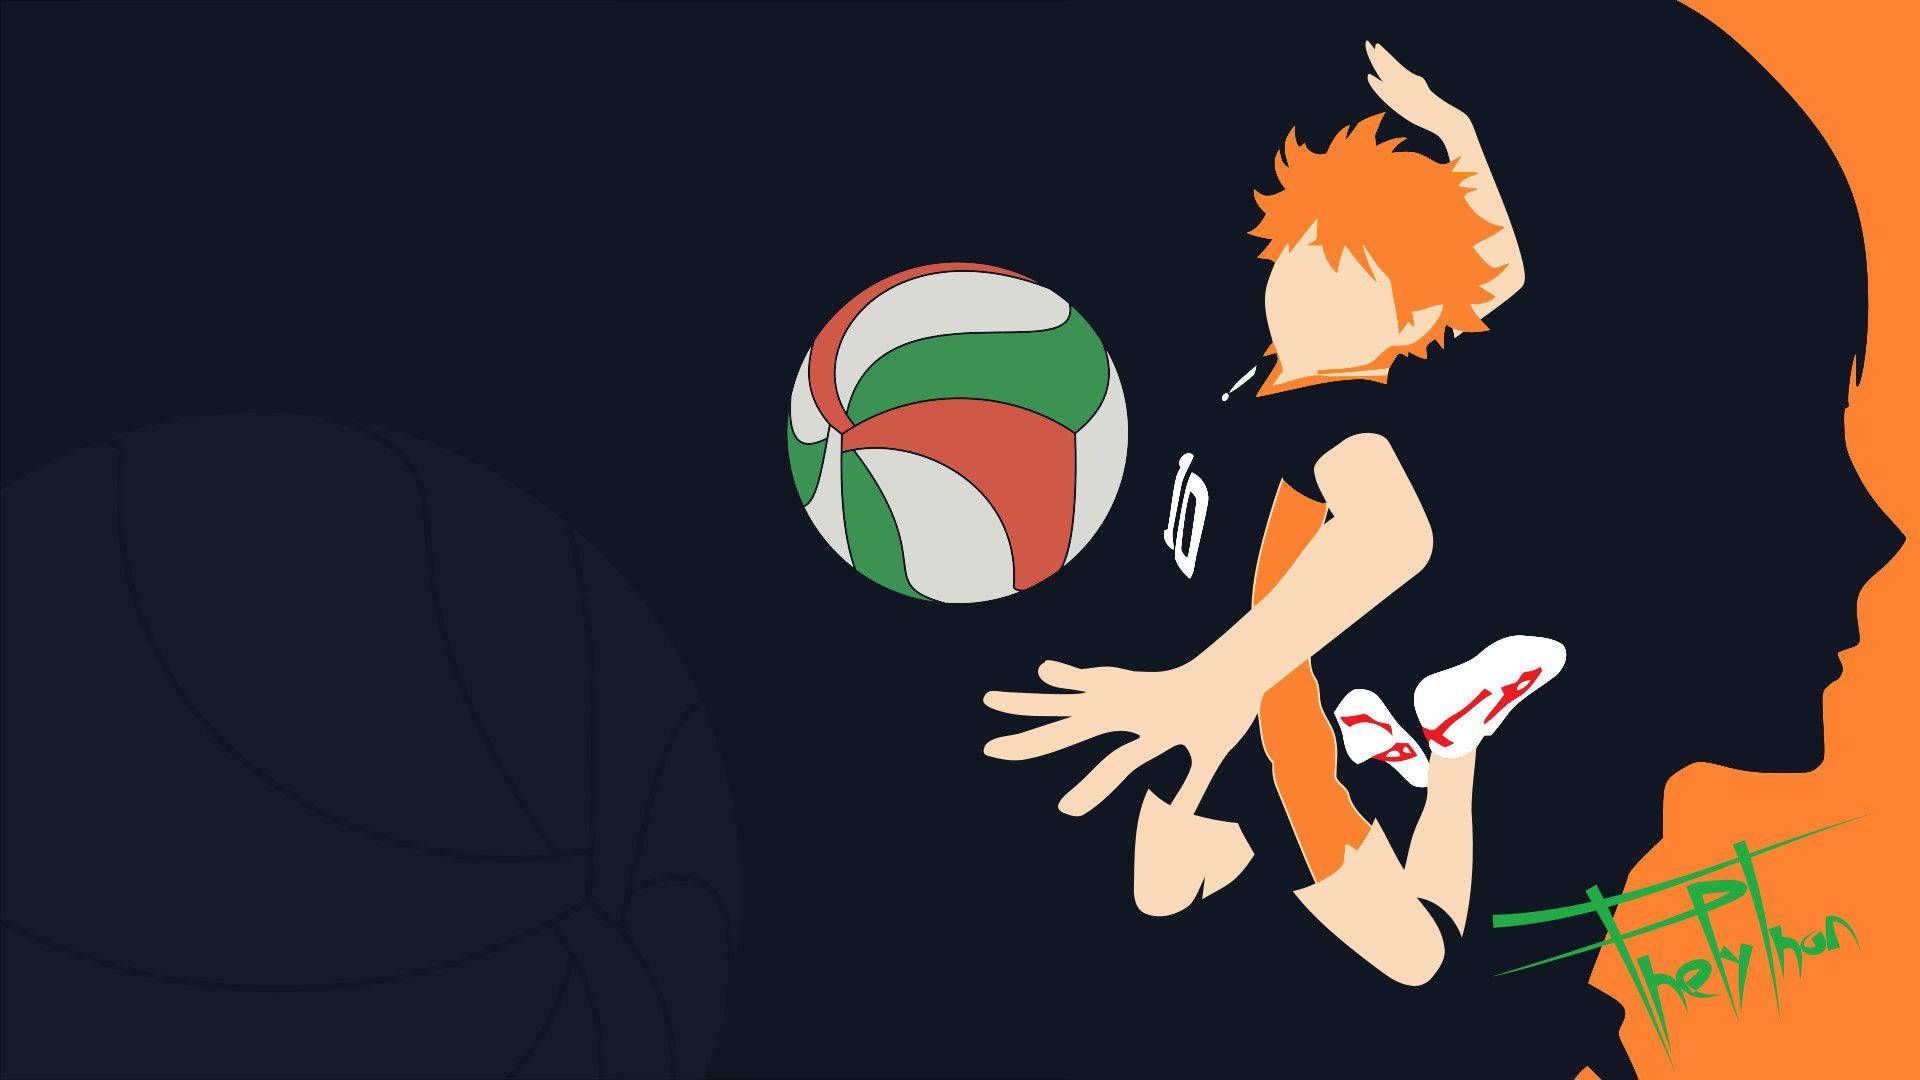 Hinata Shouyou, the passionate volleyball player determined to reach his dreams. Wallpaper